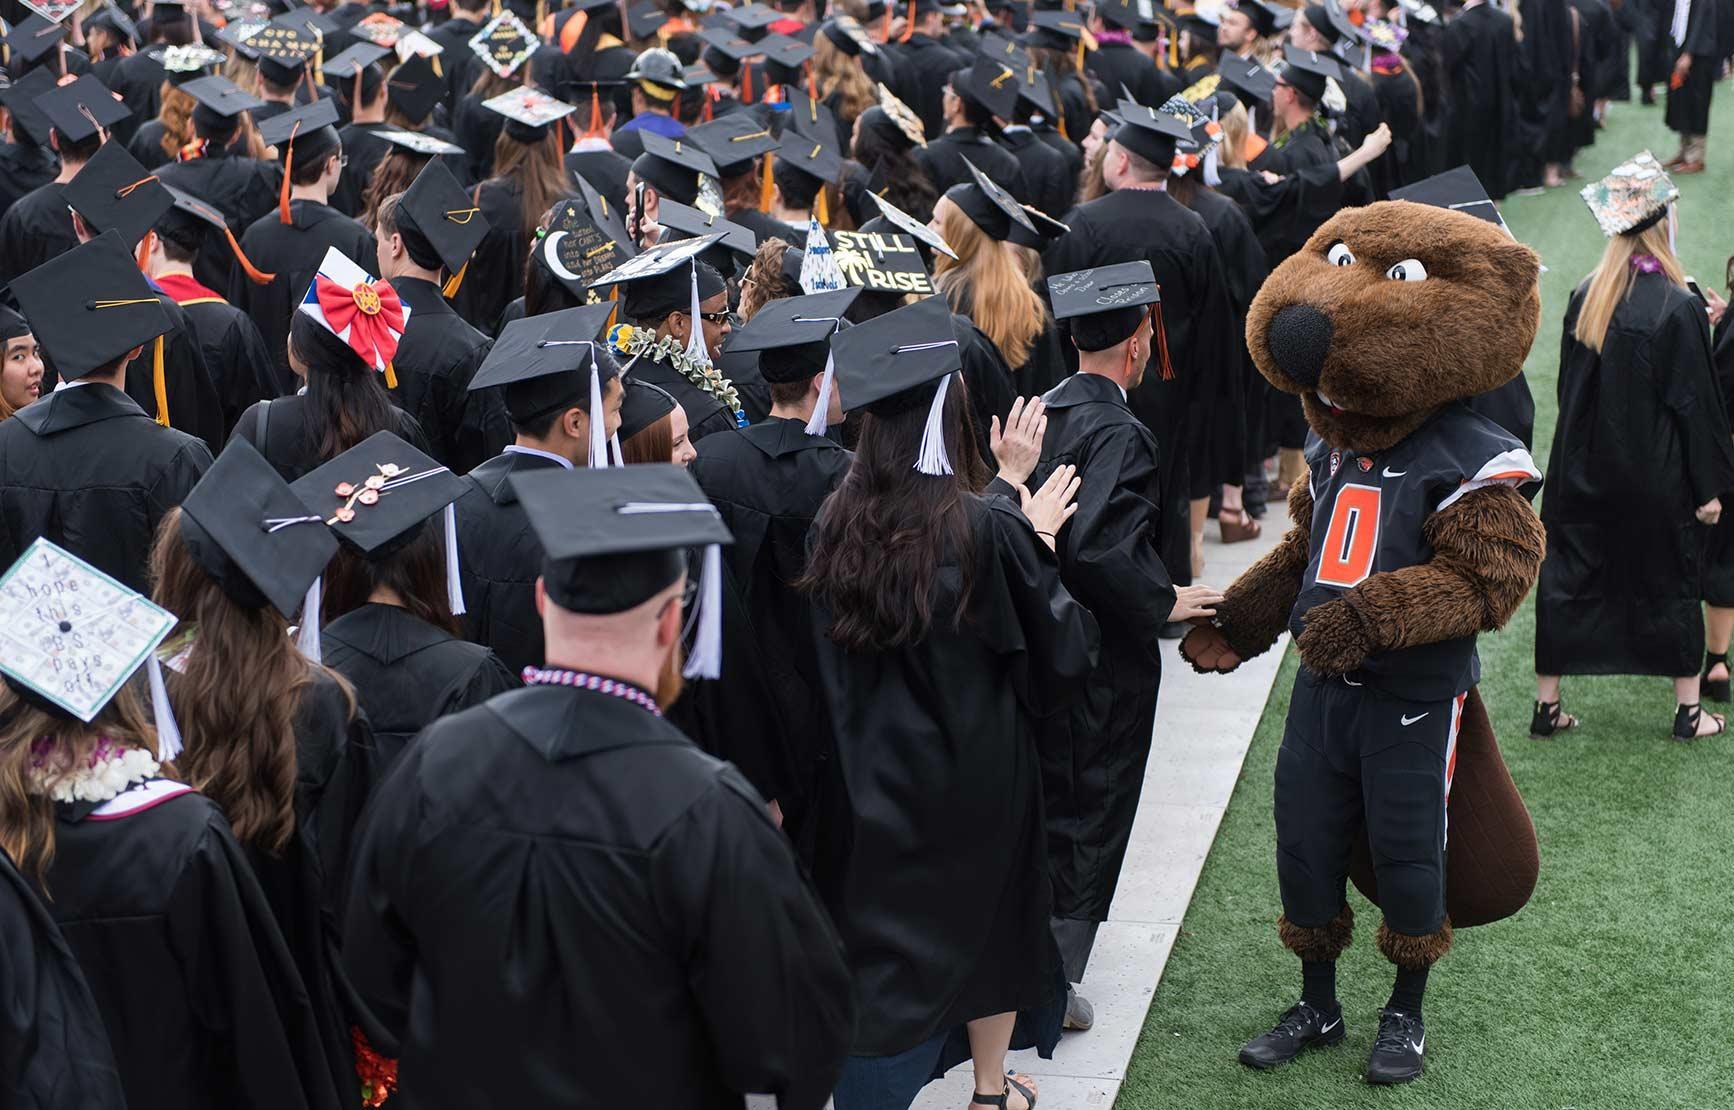 Benny the Beaver shaking hands with graduating seniors.